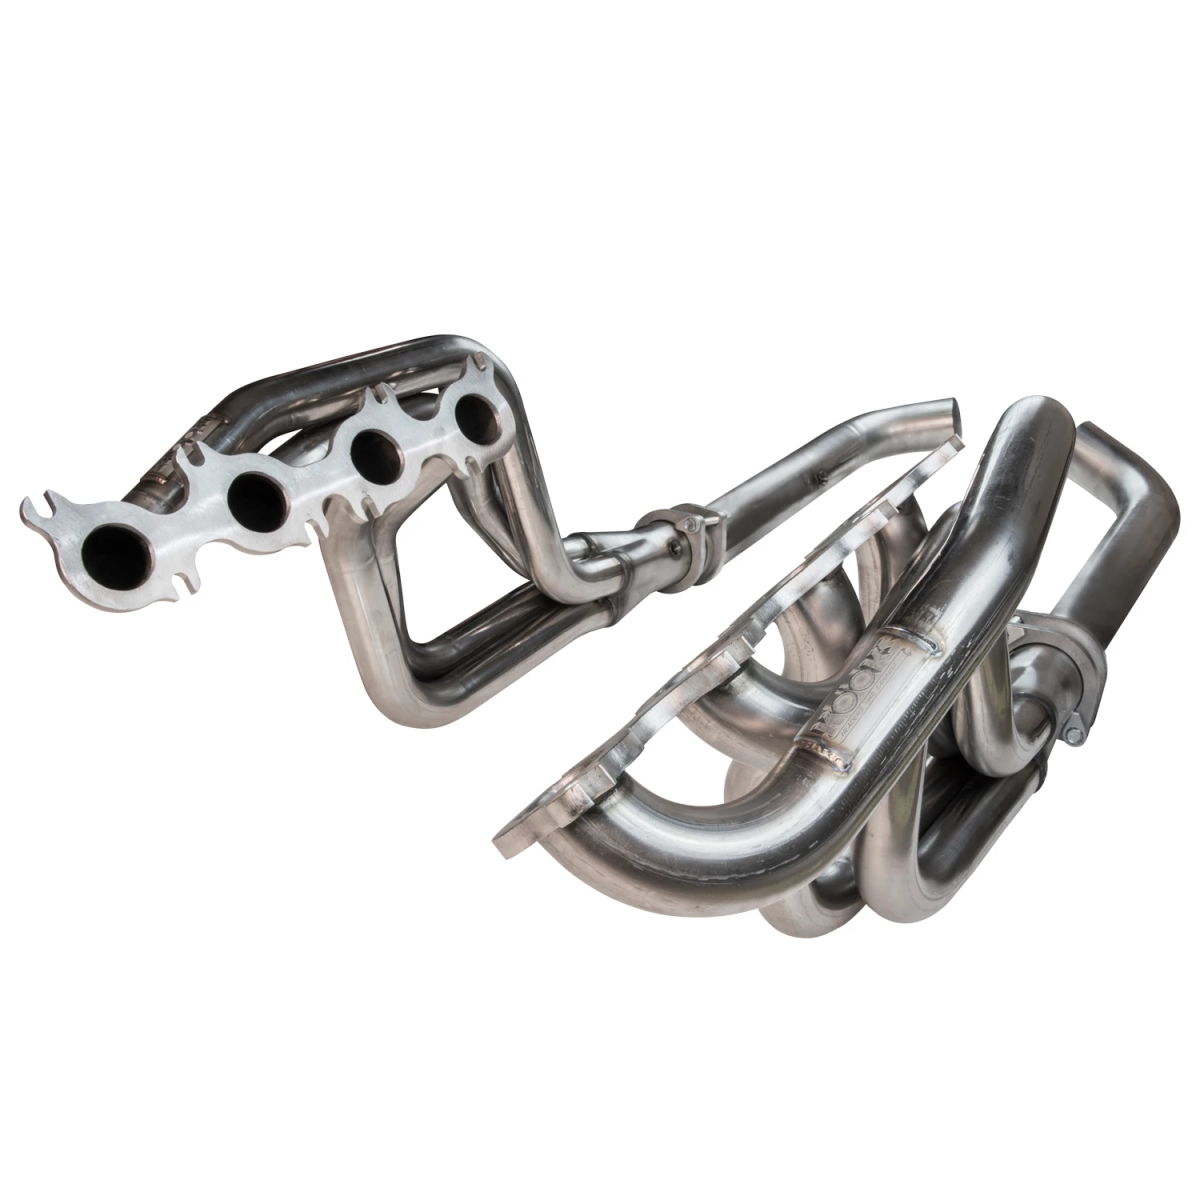 Kooks Headers - Right Hand Drive Ford Mustang GT 2015-2020 Kooks Long Tube Headers 1 7/8" x 3" with Competition Only Connection Pipes - Image 1